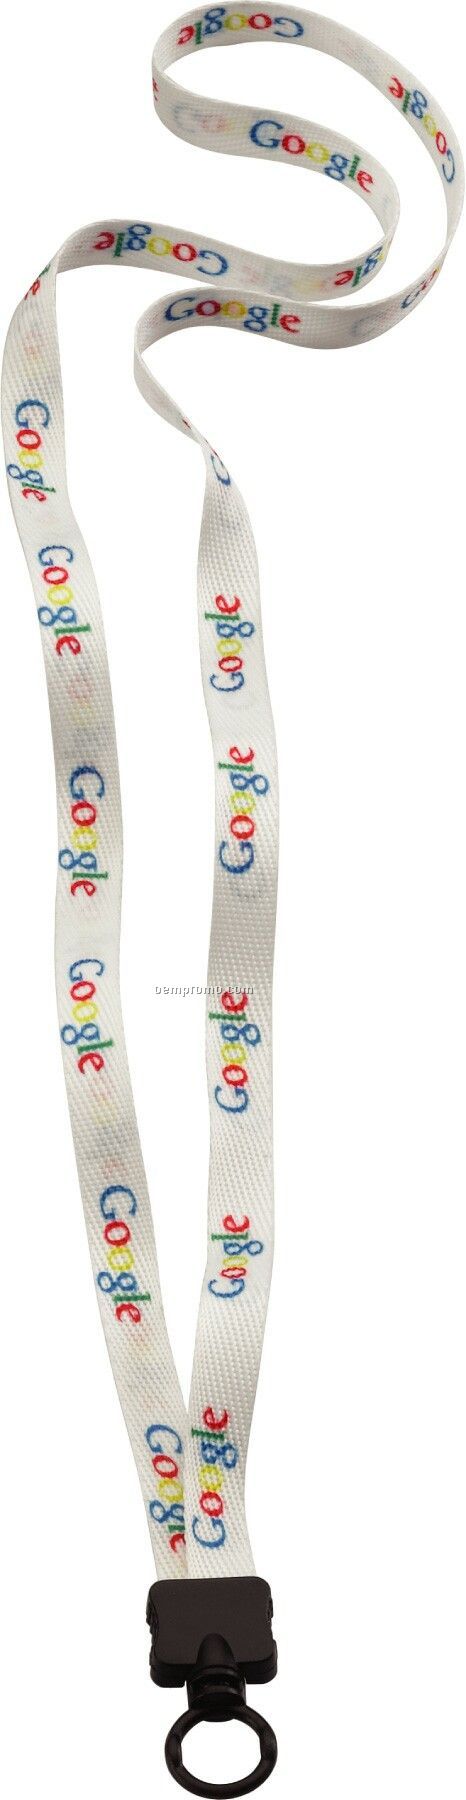 1/2" Waffle Weave Dye Sublimated Lanyard With Plastic Clamshell & O-ring